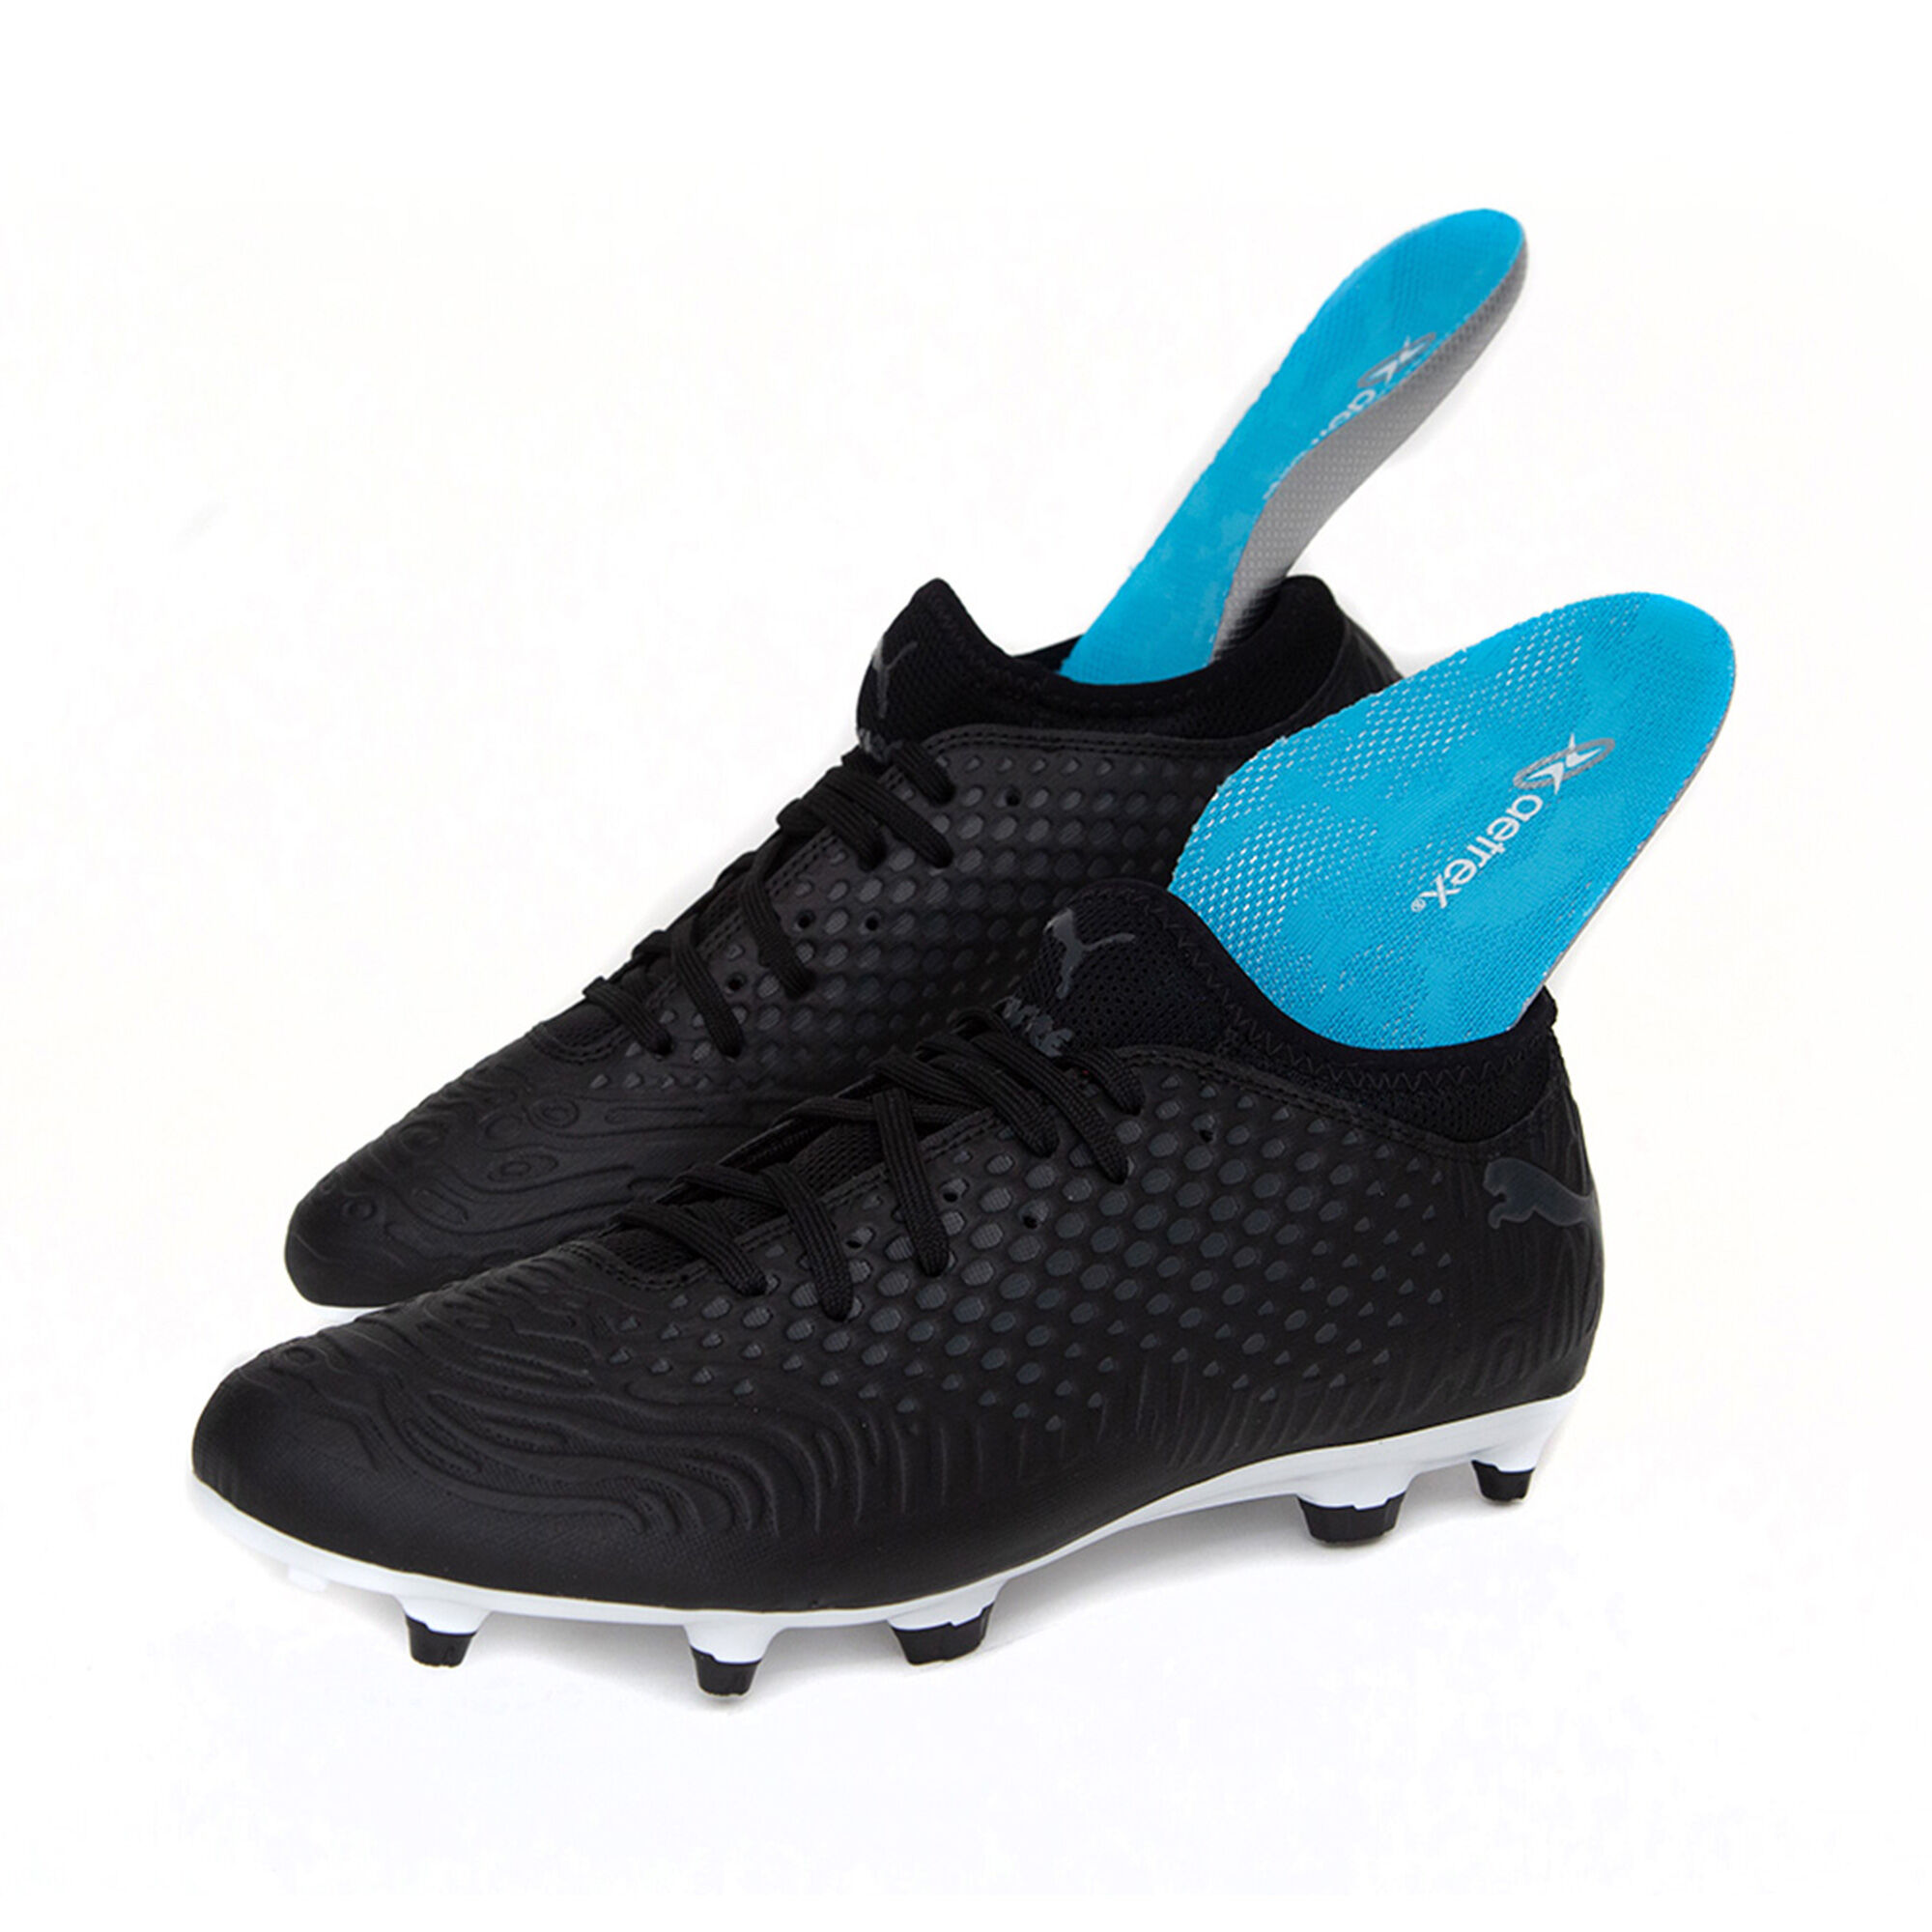 Arch Support Insoles for Cleats 